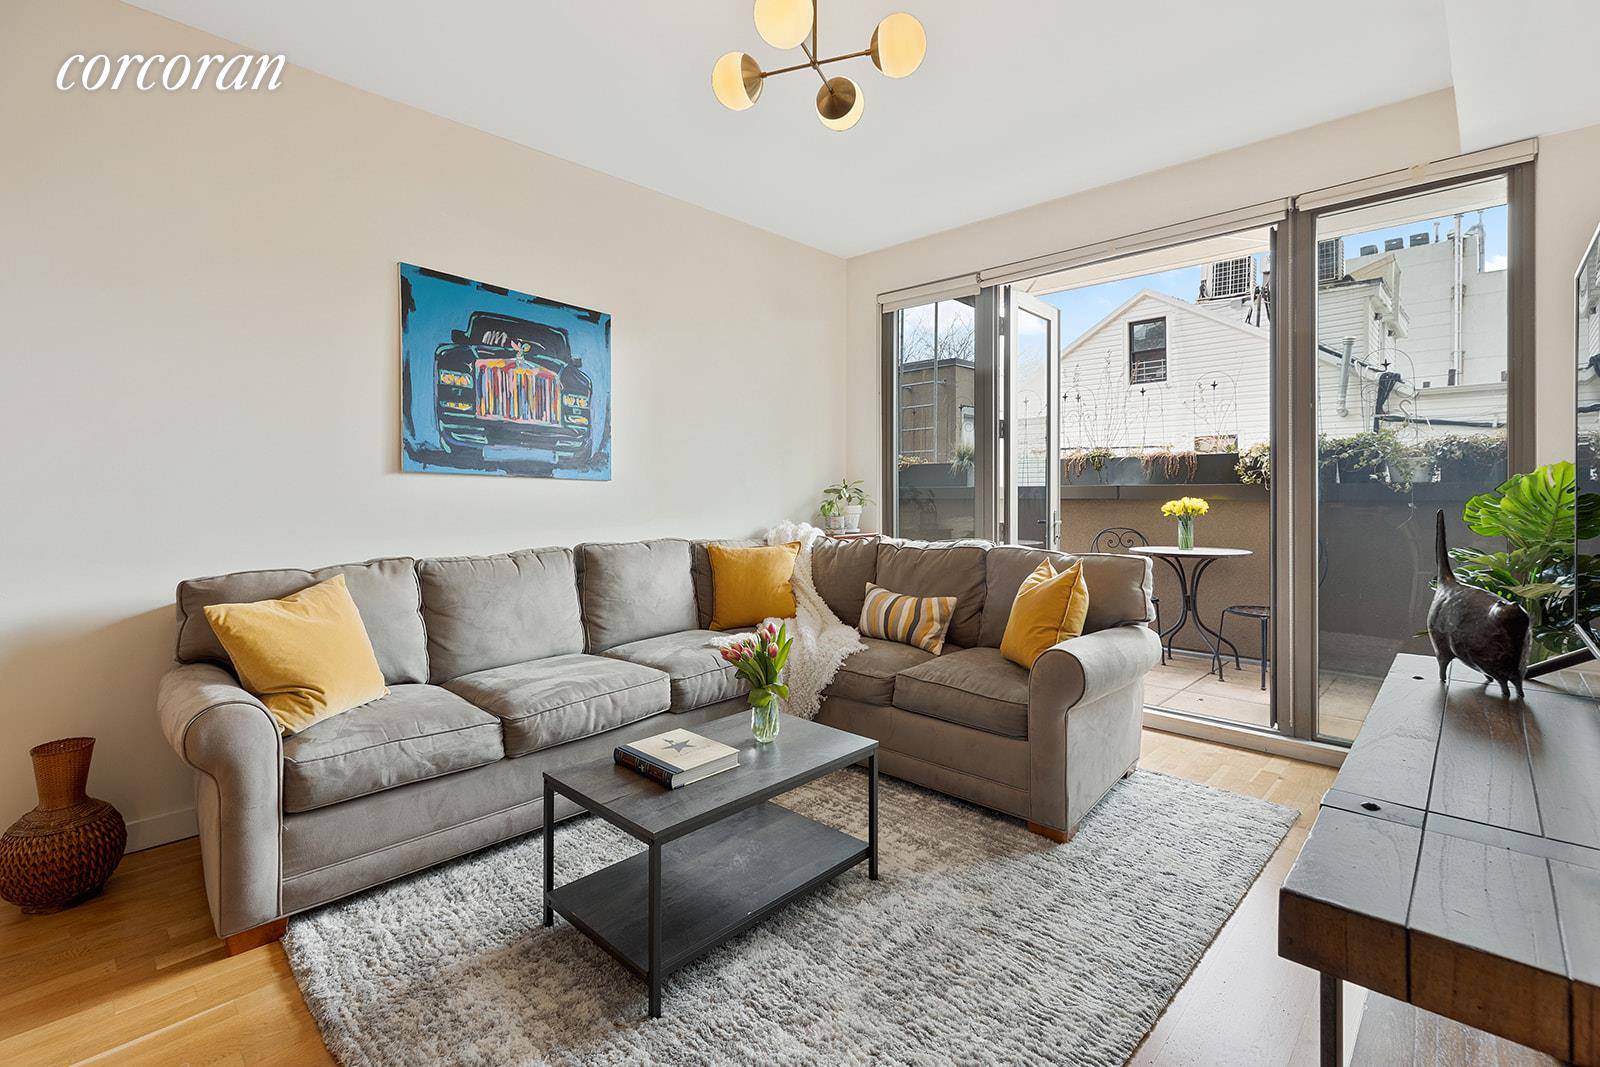 Airy and peaceful, this extra wide condo apartment features almost 200 square feet of private outdoor space with room for dining and gardening, and faces the quiet west side of ...